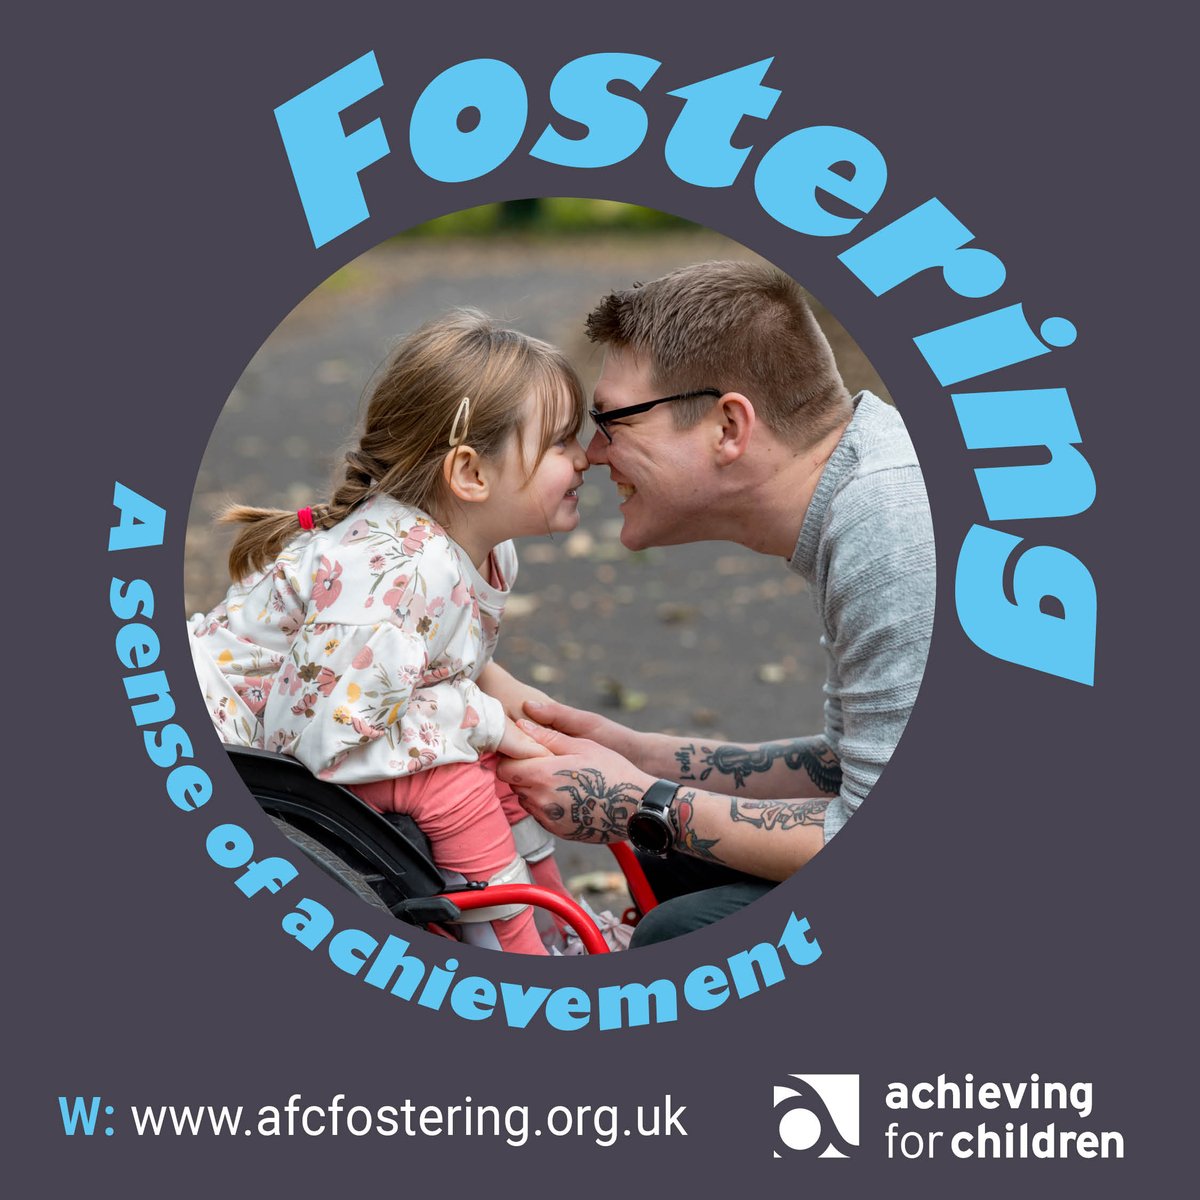 The outcomes for children are so positive and the rewards for the carers are huge. 

The idea that 'helping one person may not change the world but it could change the world for one person' really underlines the difference fostering can make.

#FCF23 #FosteringCommunities 💗